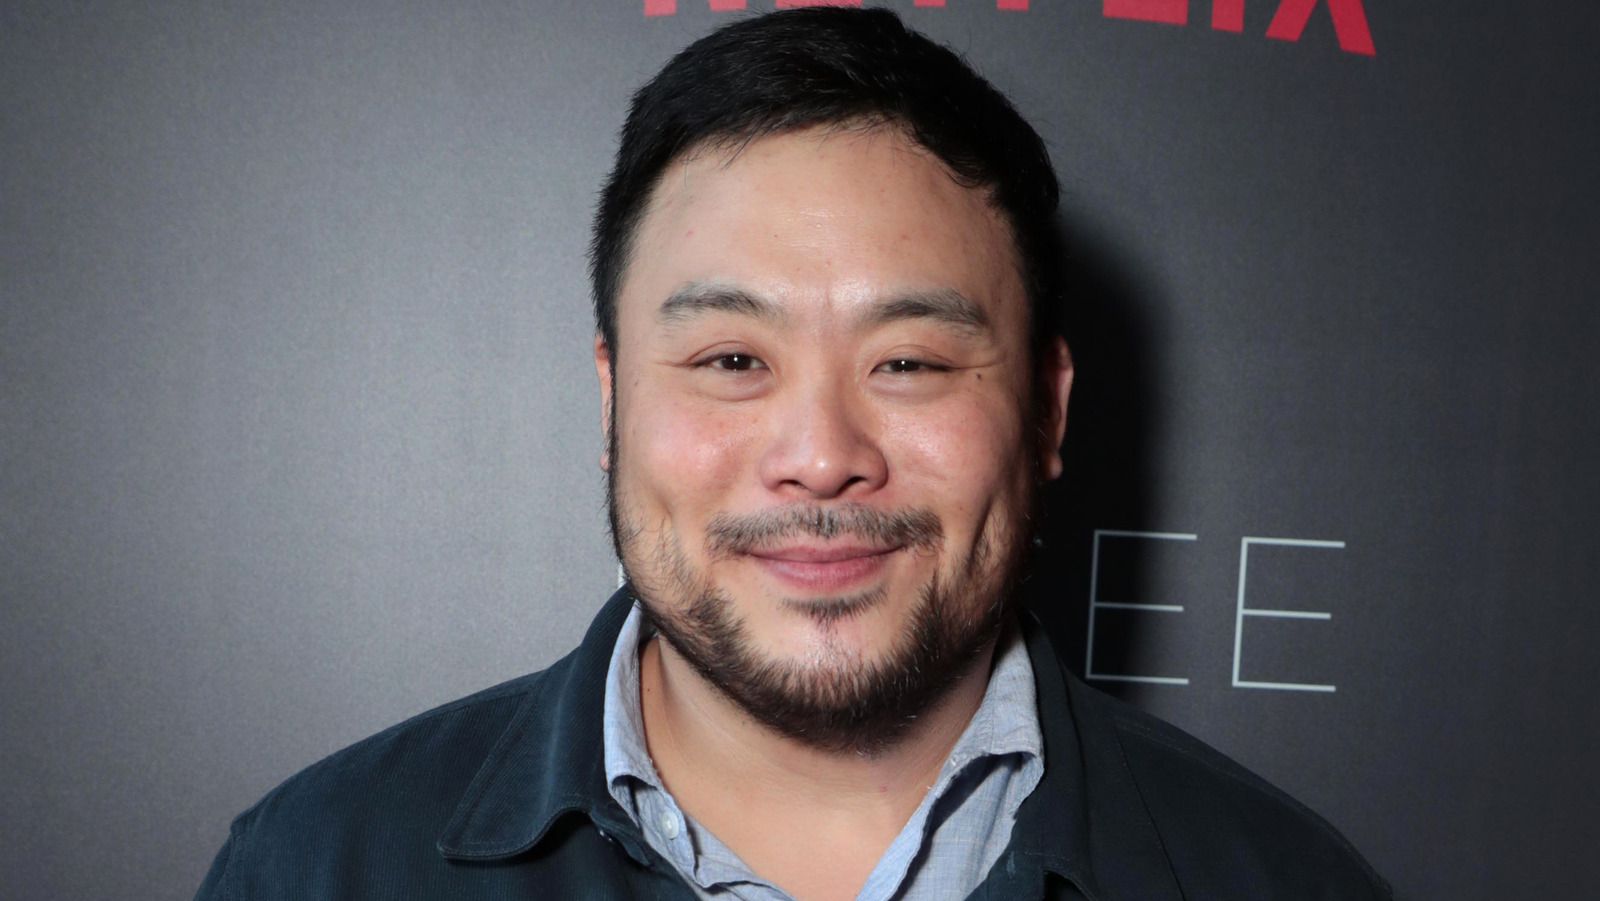 The Absolute Best Canned Tuna According To Chef David Chang